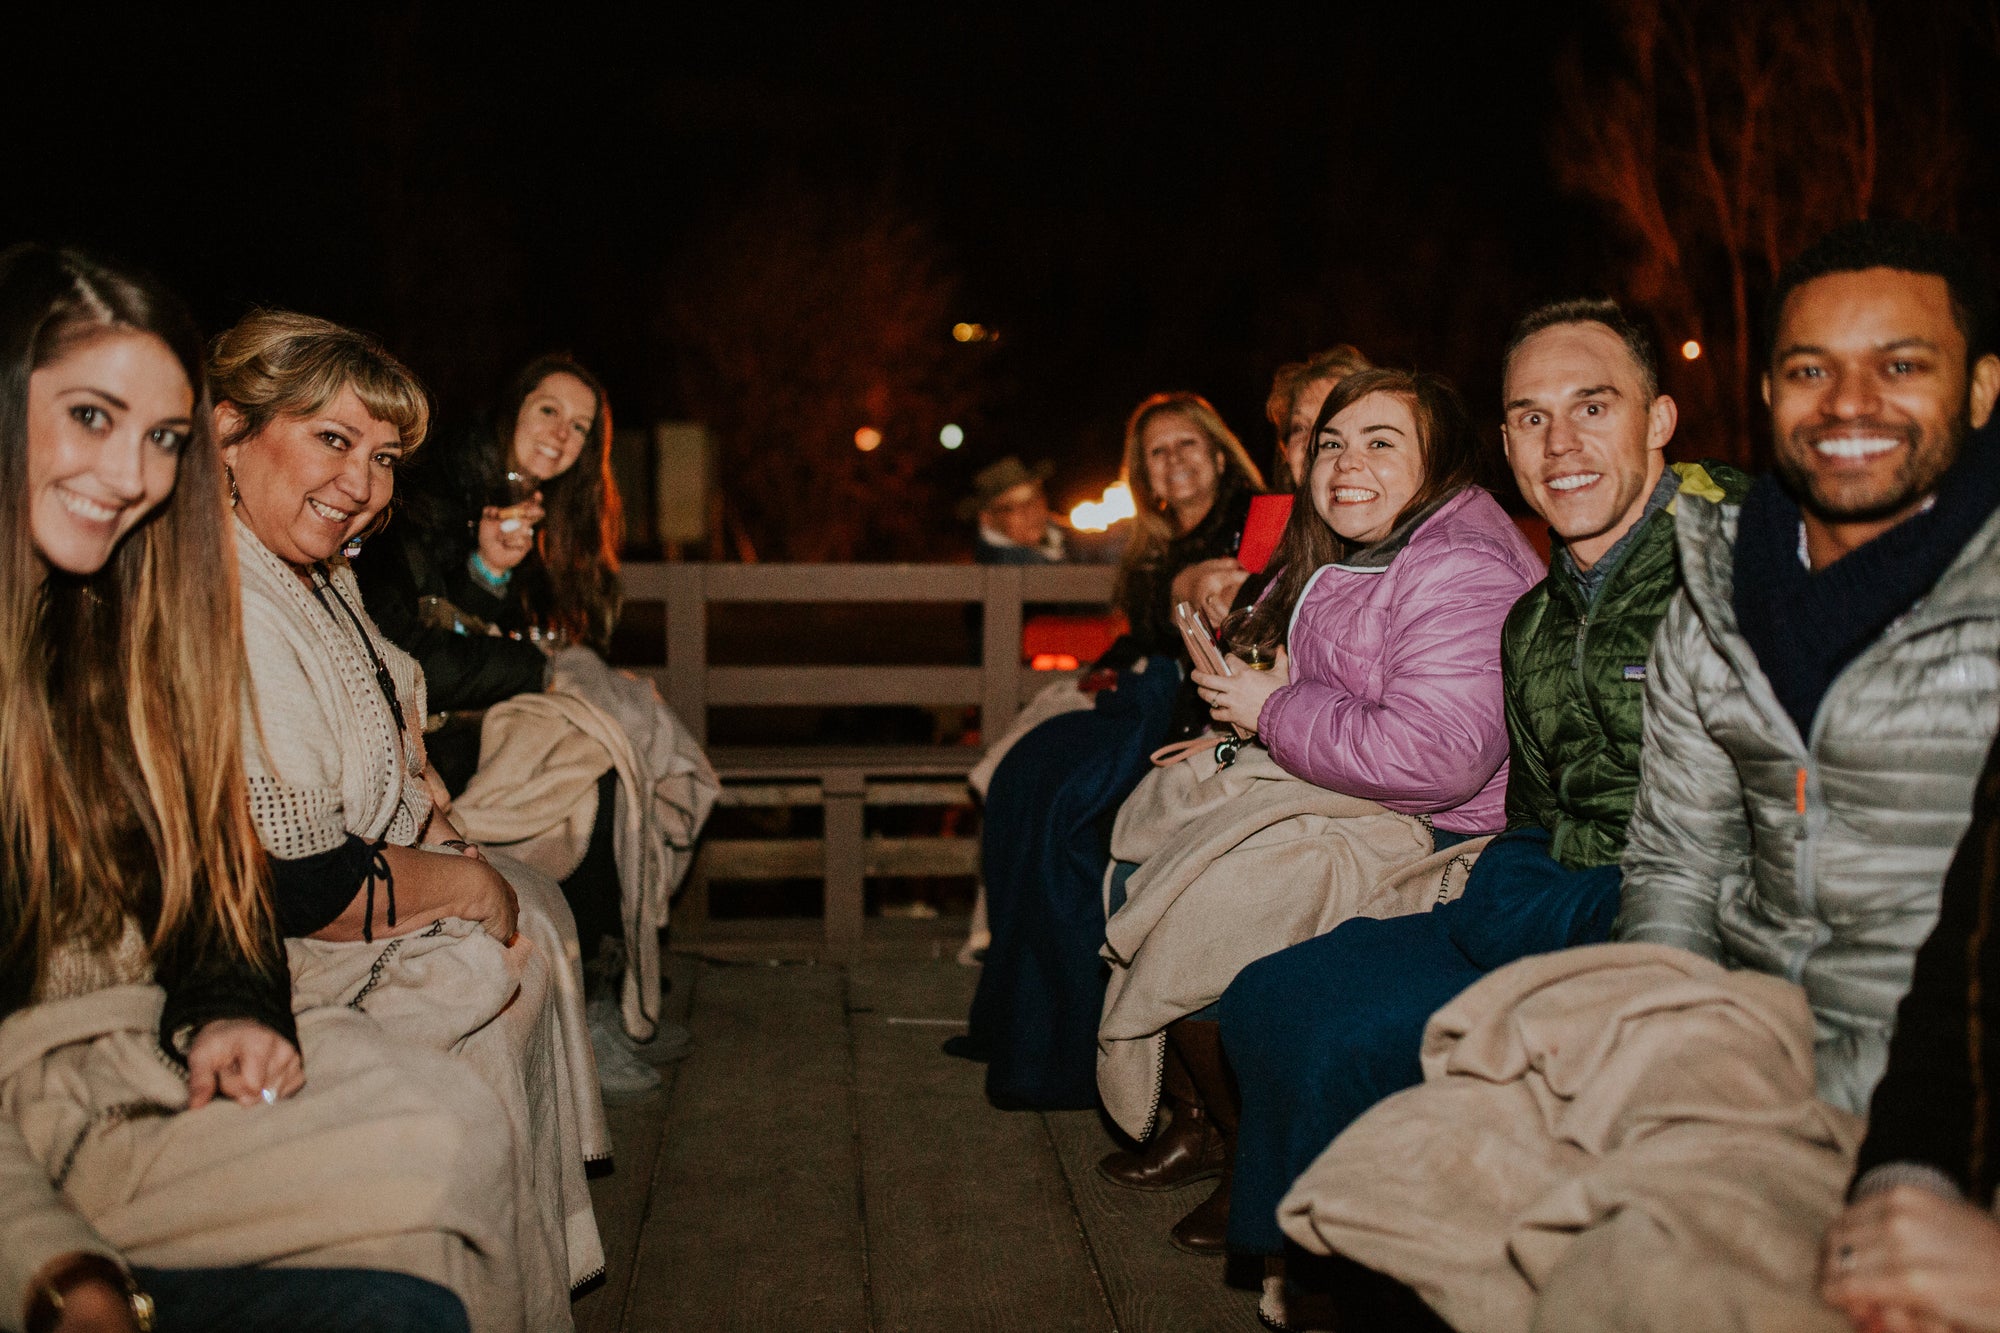 Guest favorite: Cozy hayrides at a rustic event